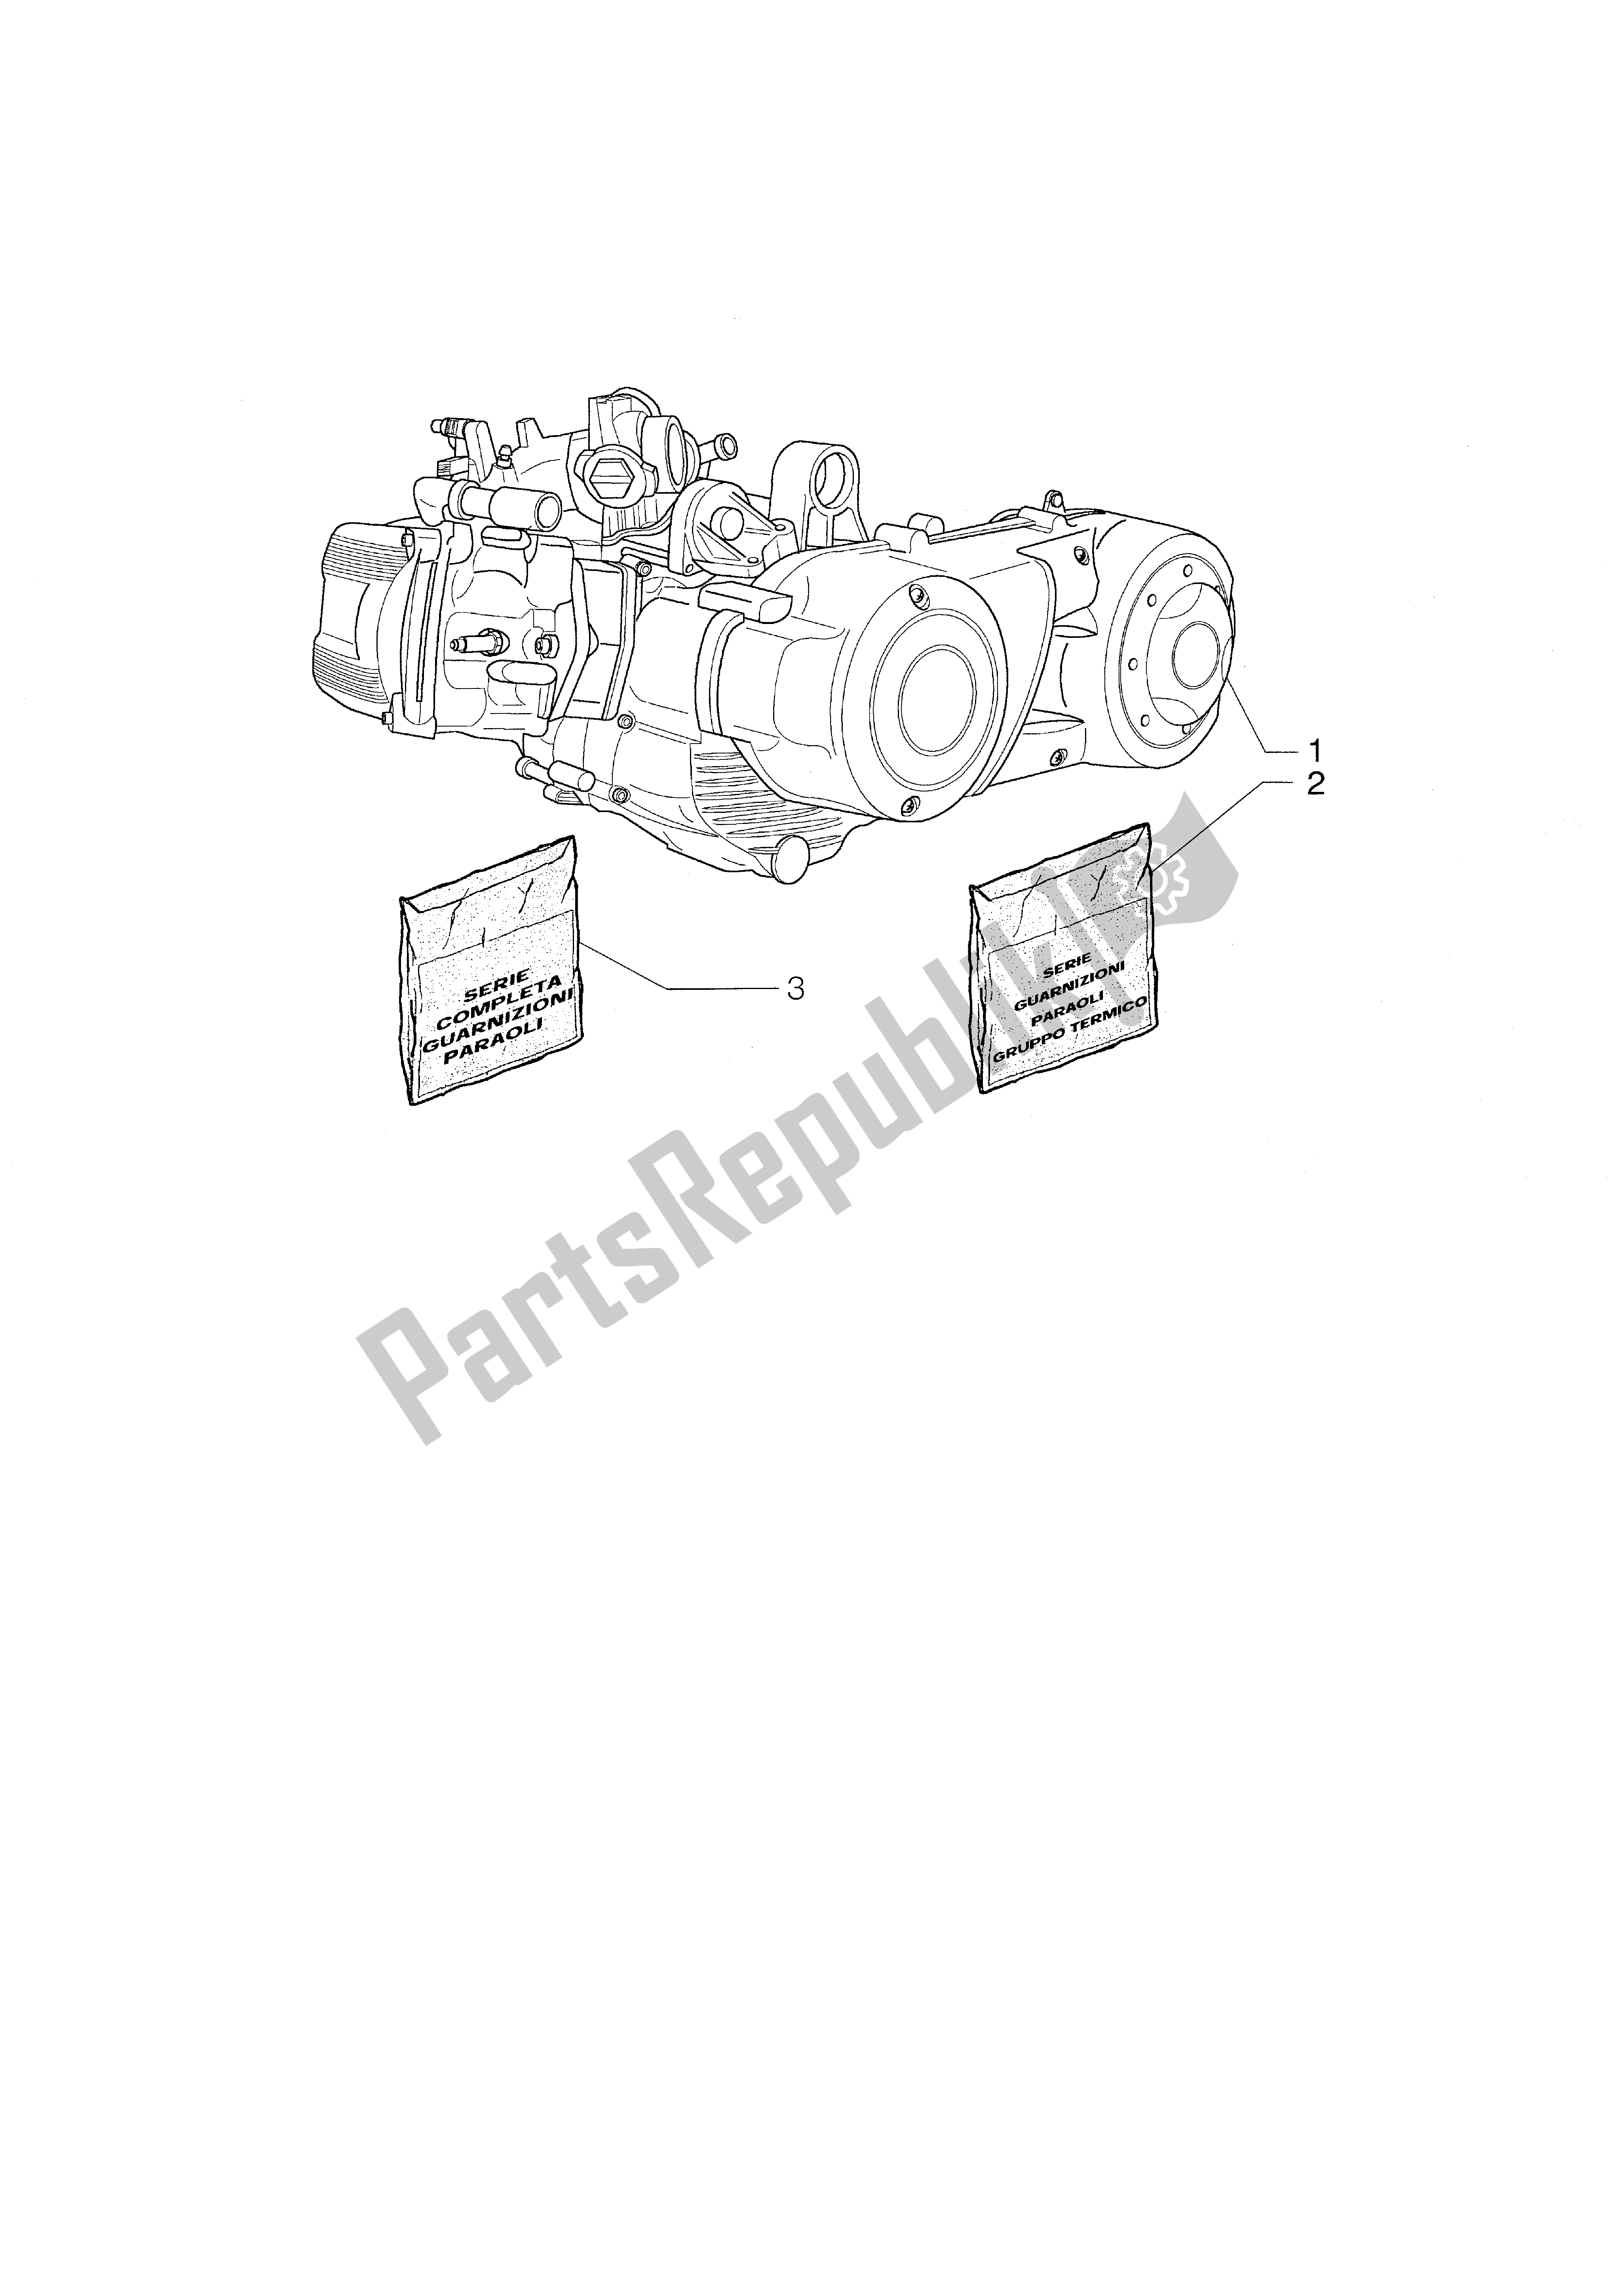 All parts for the Engine of the Piaggio X9 500 2001 - 2002